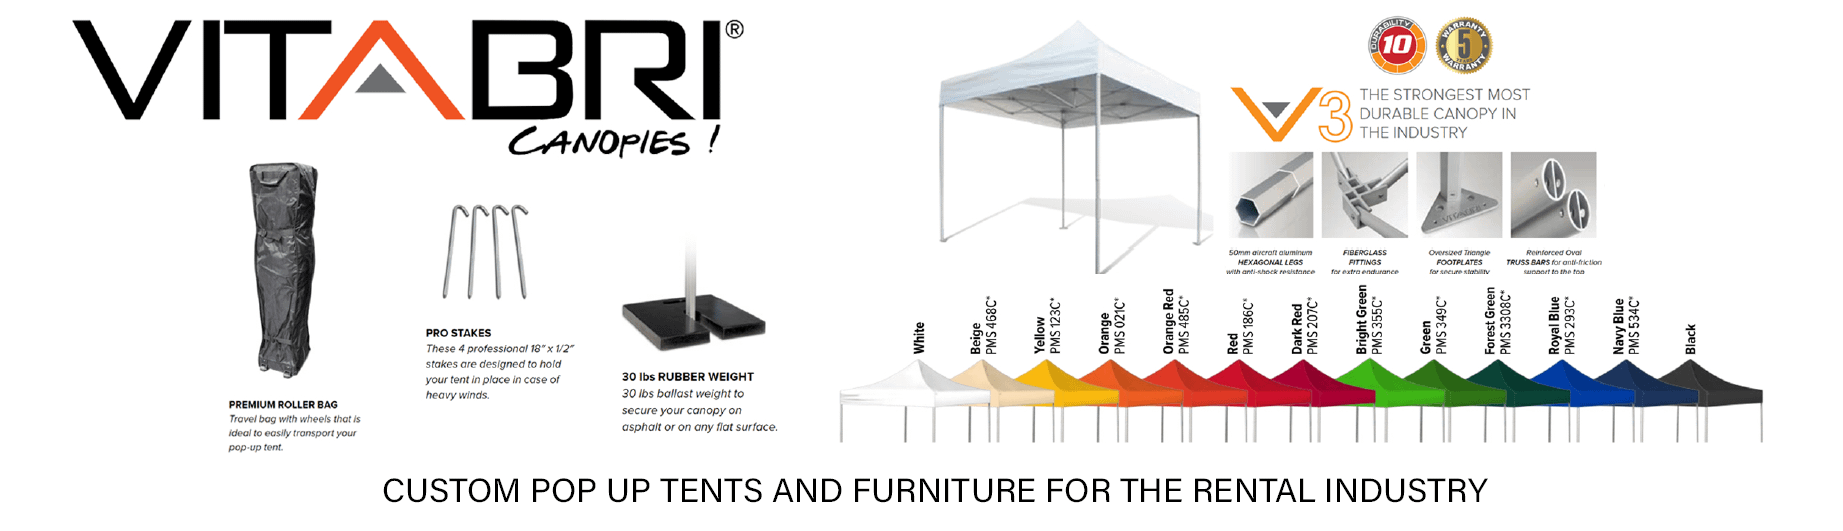 NACH Marketing - Vitabri - Custom Pop-Up Tents and Furniture for the Rental Industry